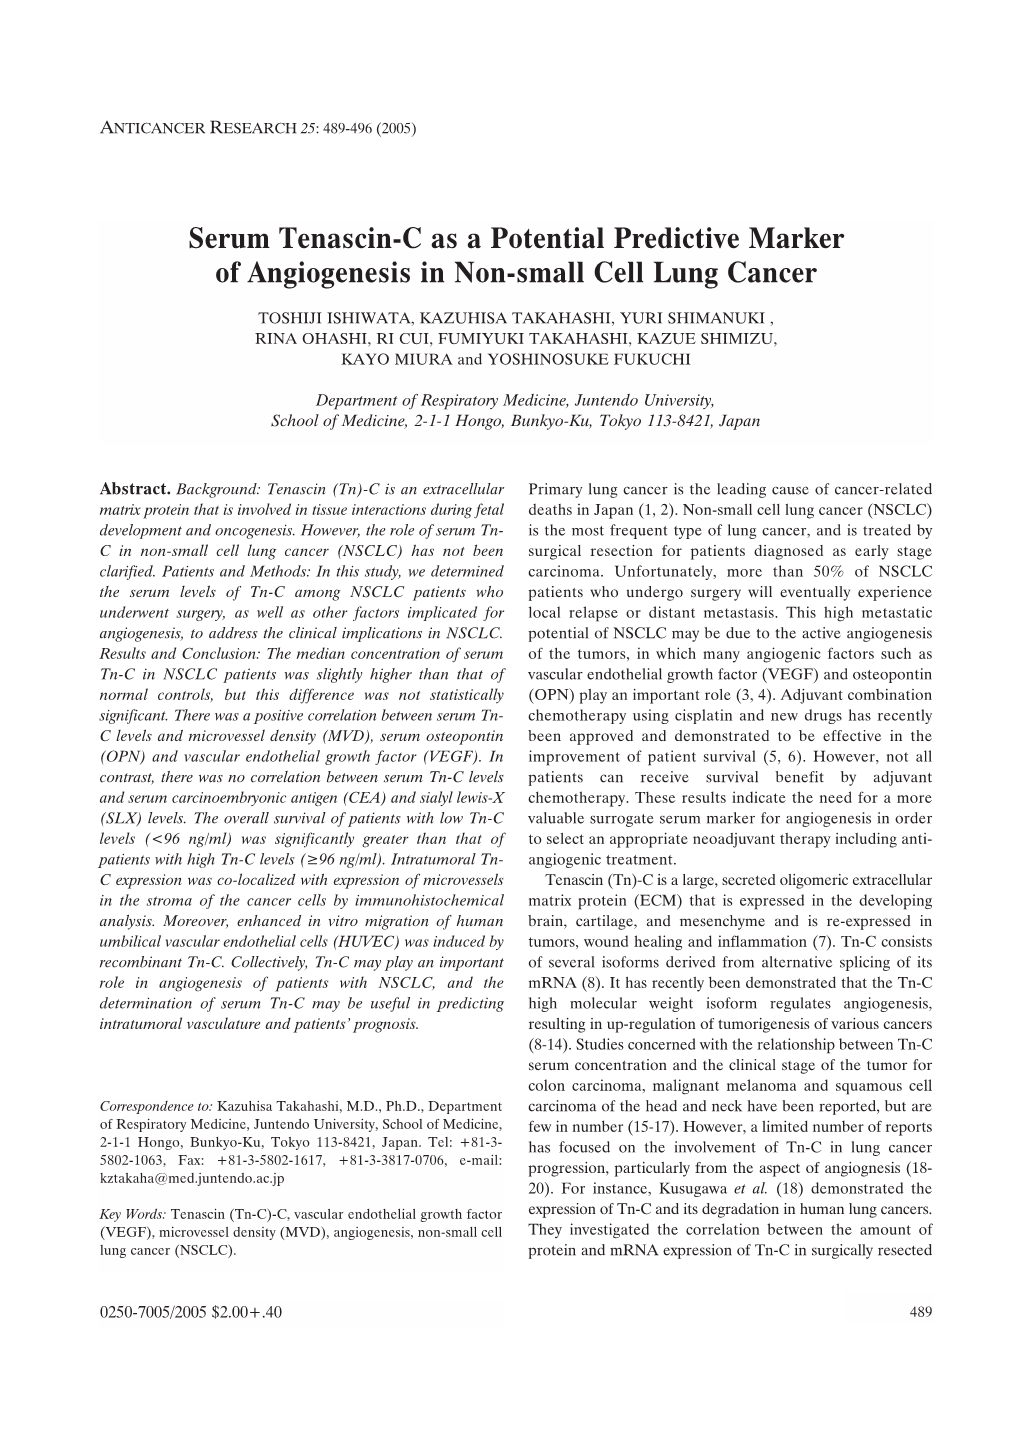 Serum Tenascin-C As a Potential Predictive Marker of Angiogenesis in Non-Small Cell Lung Cancer